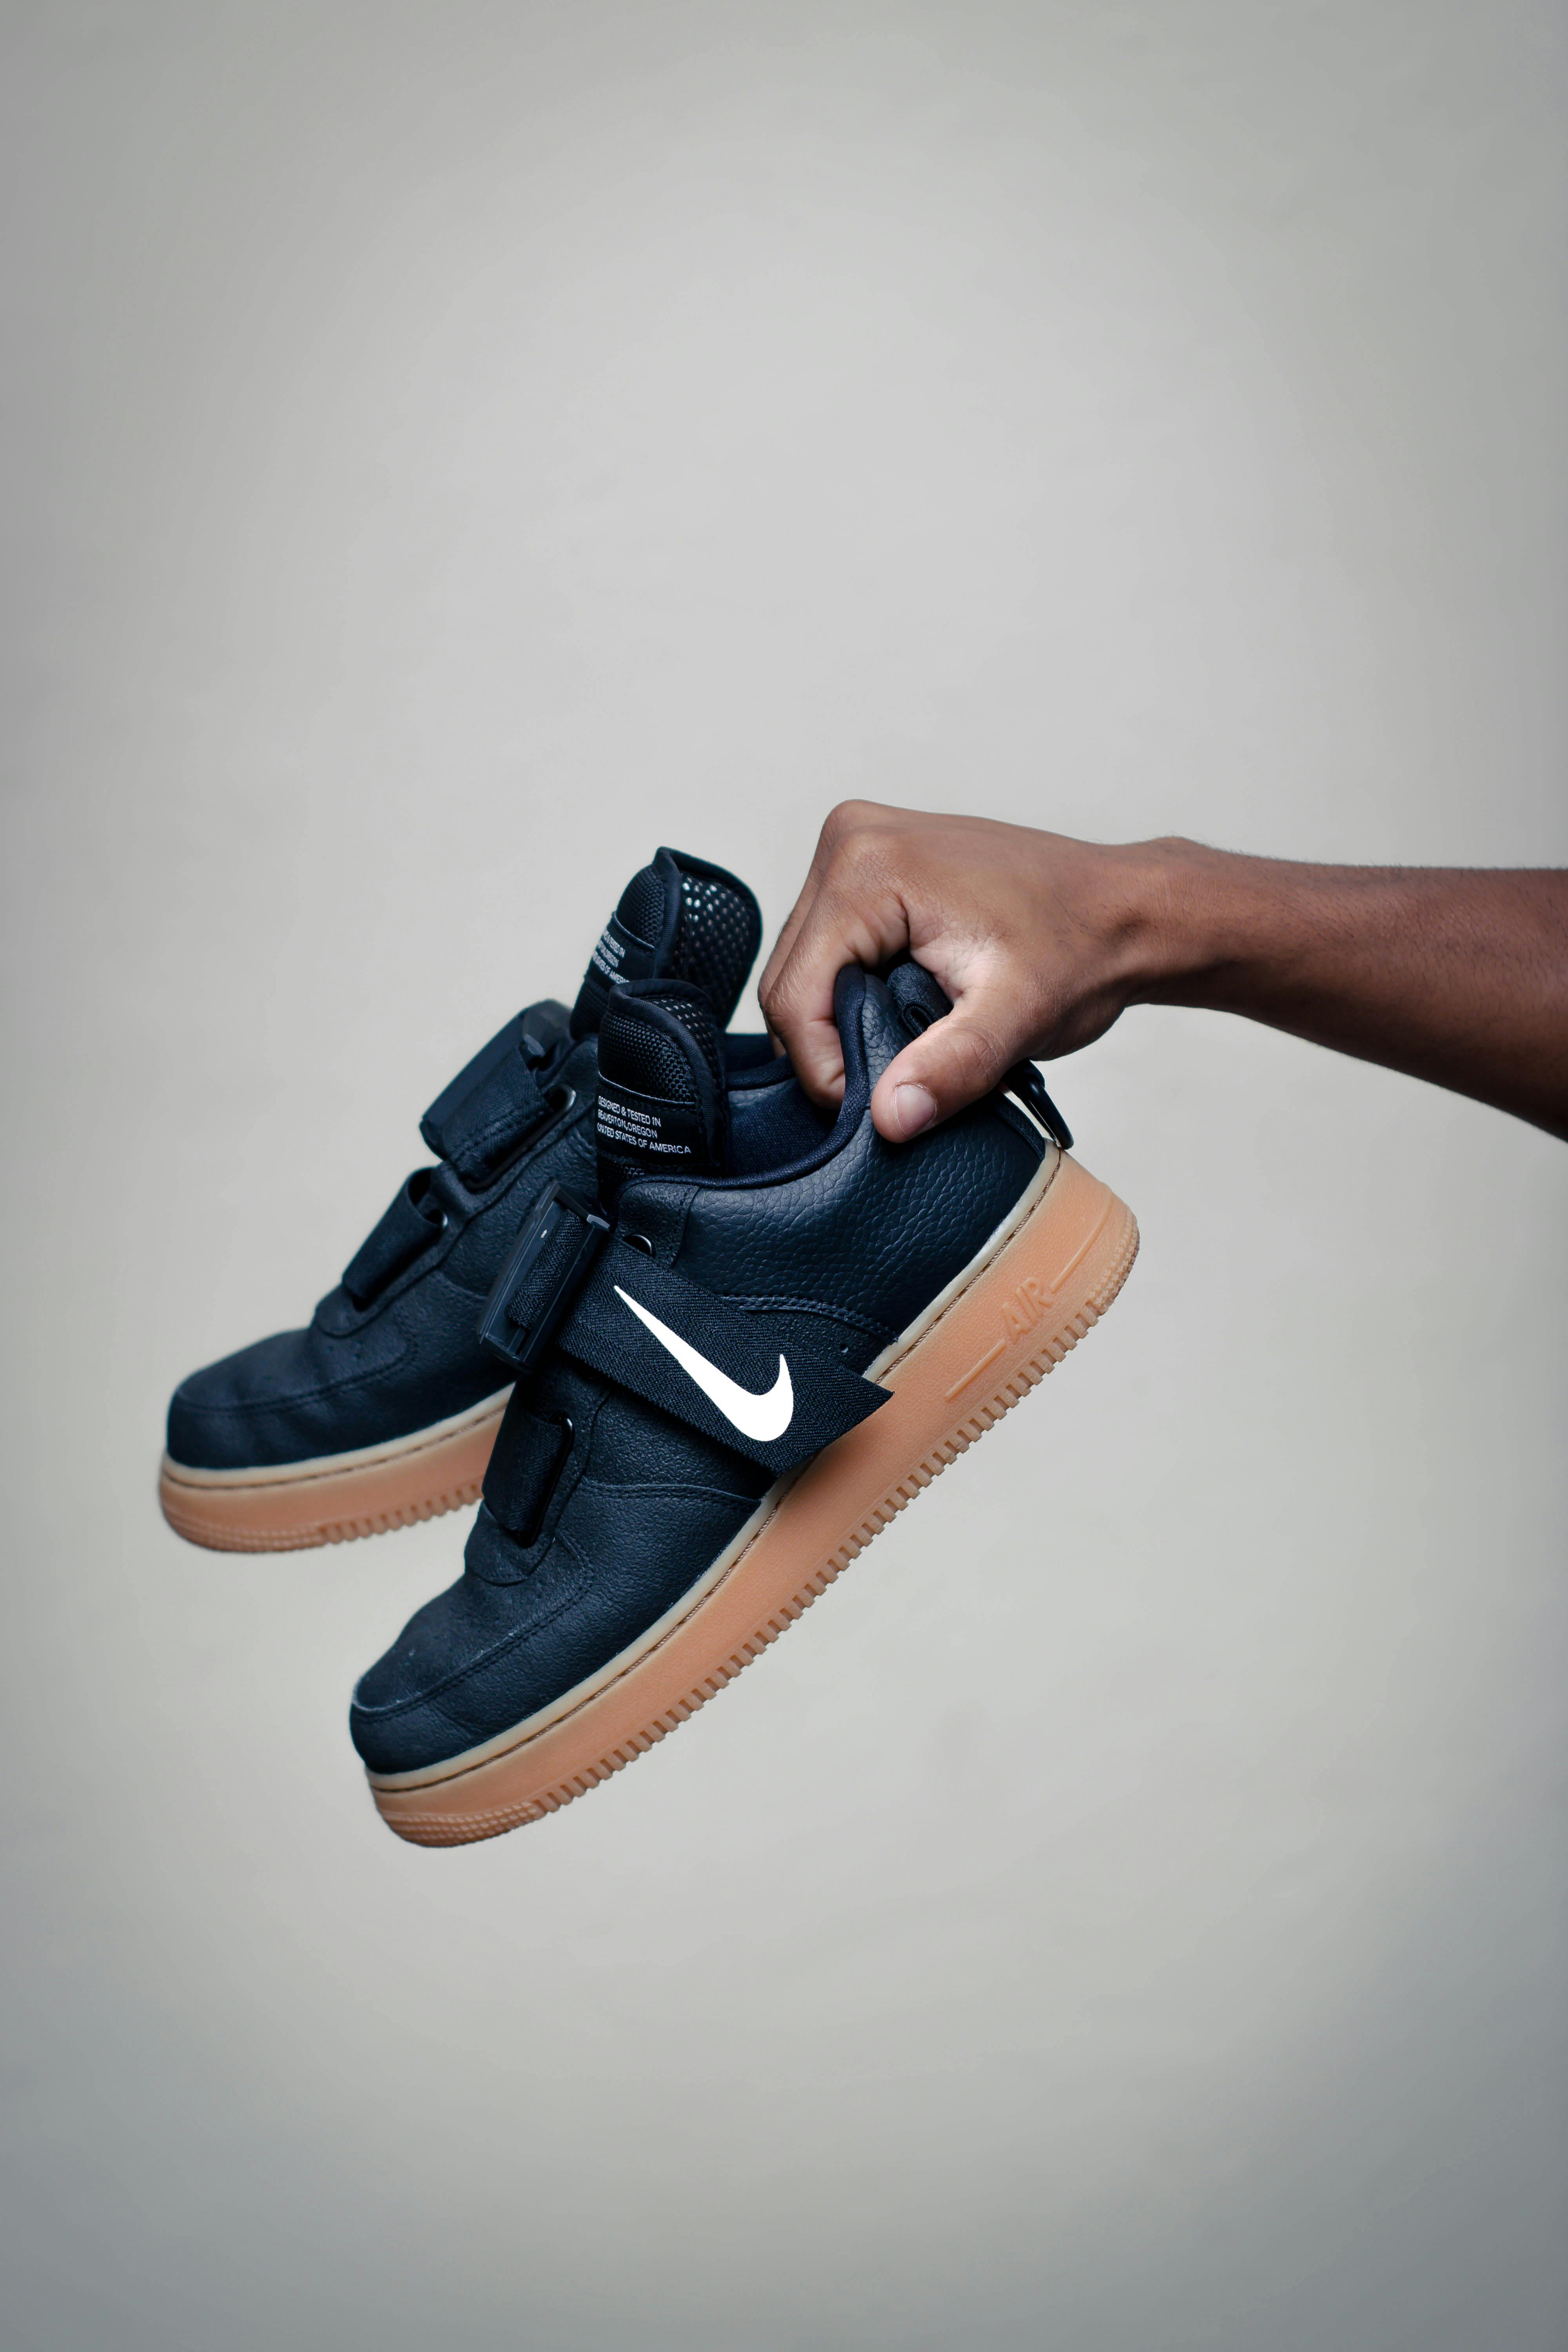 Black and brown nike high top sneakers photo – Free Apparel Image on  Unsplash